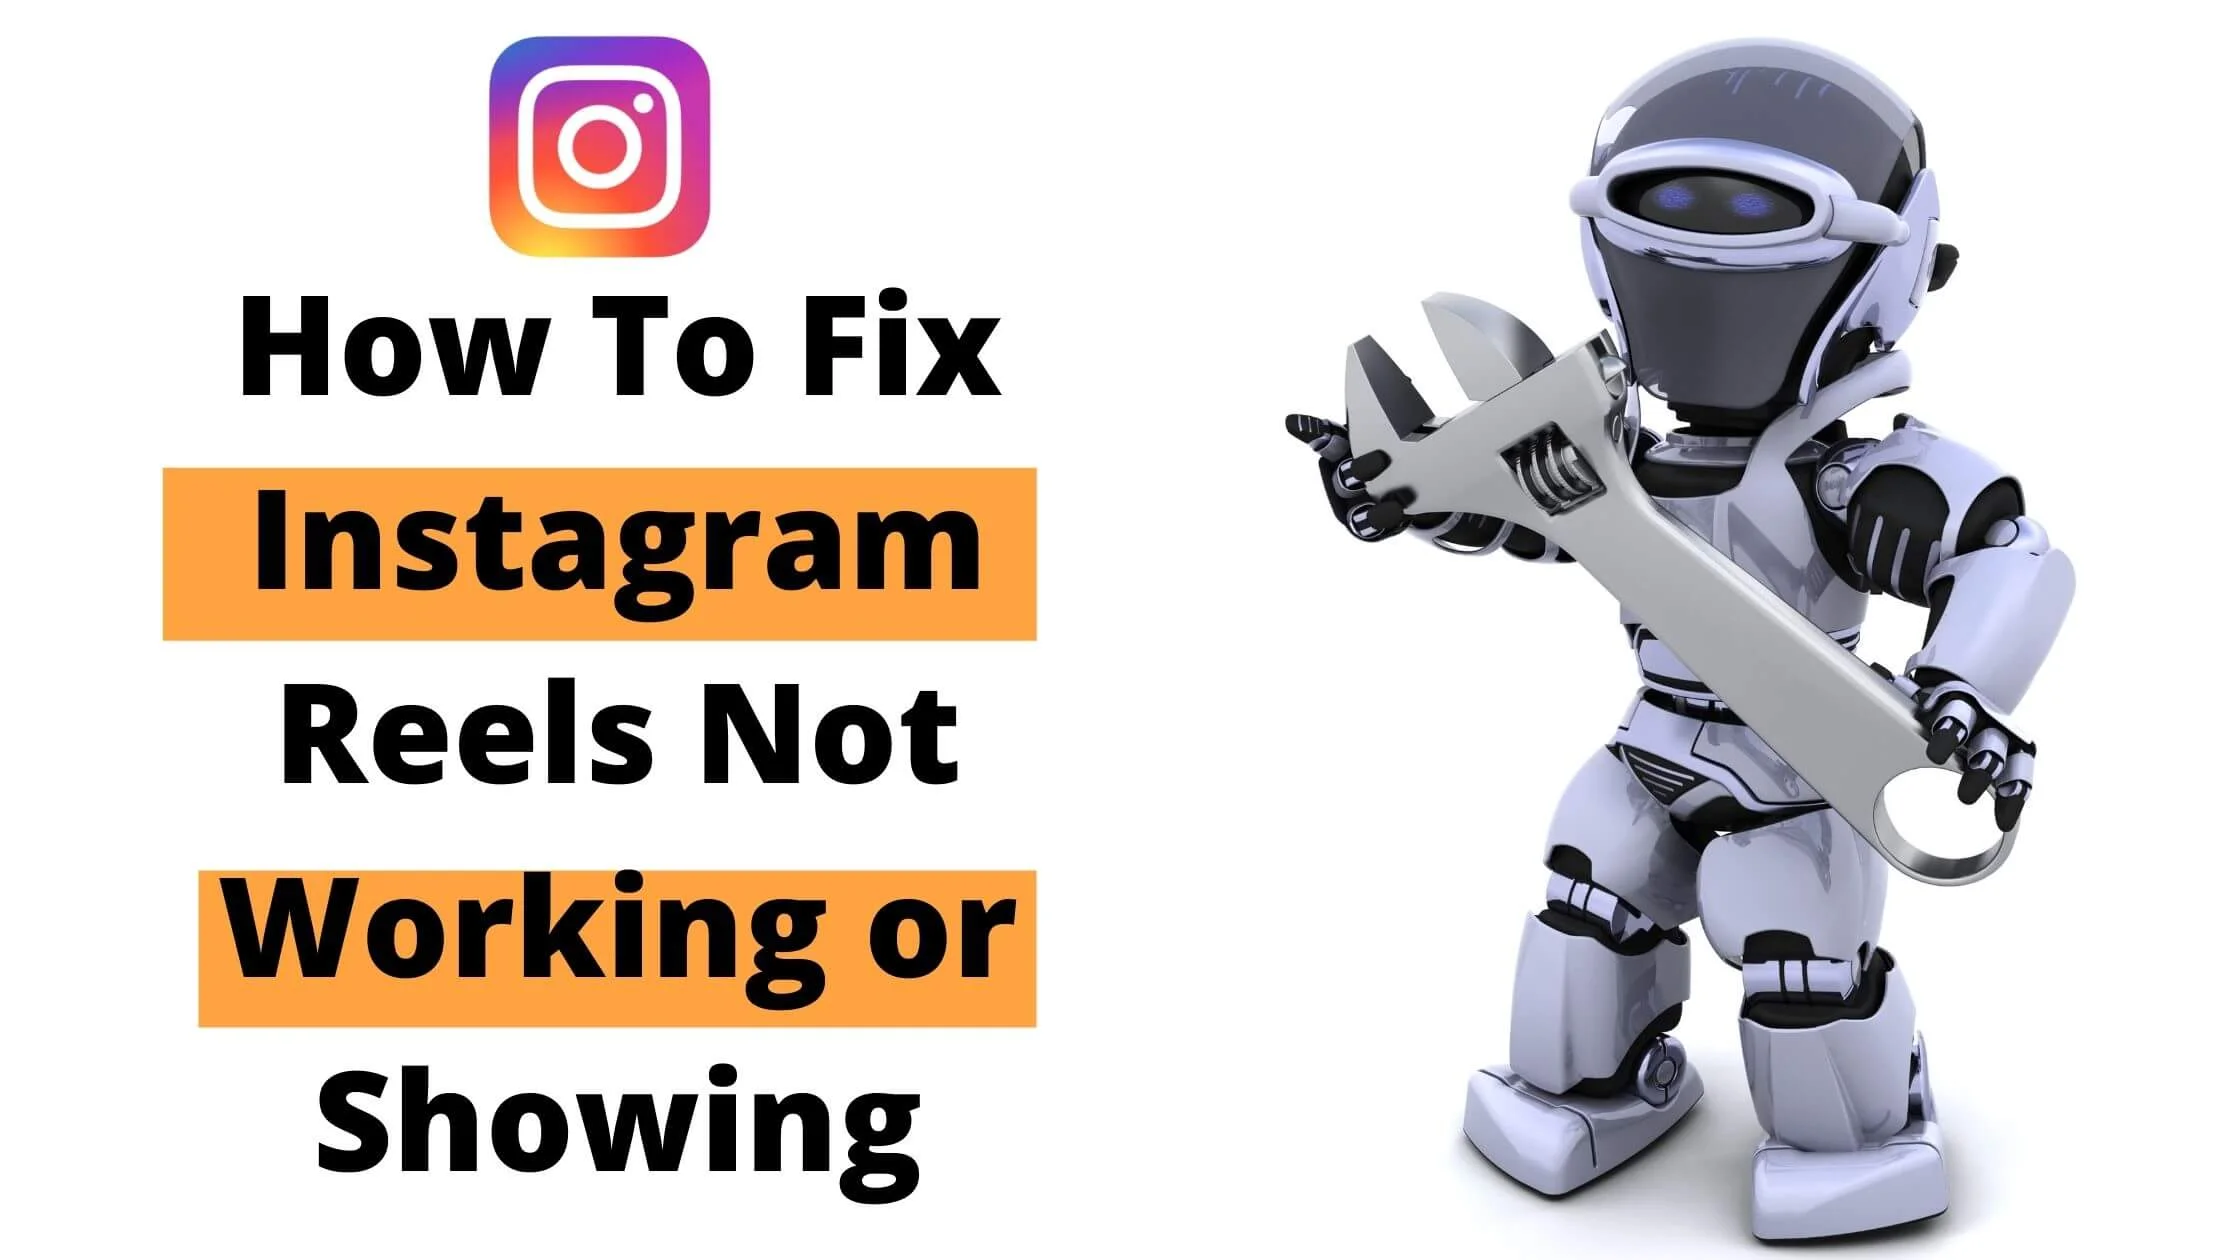 How To Fix Instagram Reels Not Working or Showing